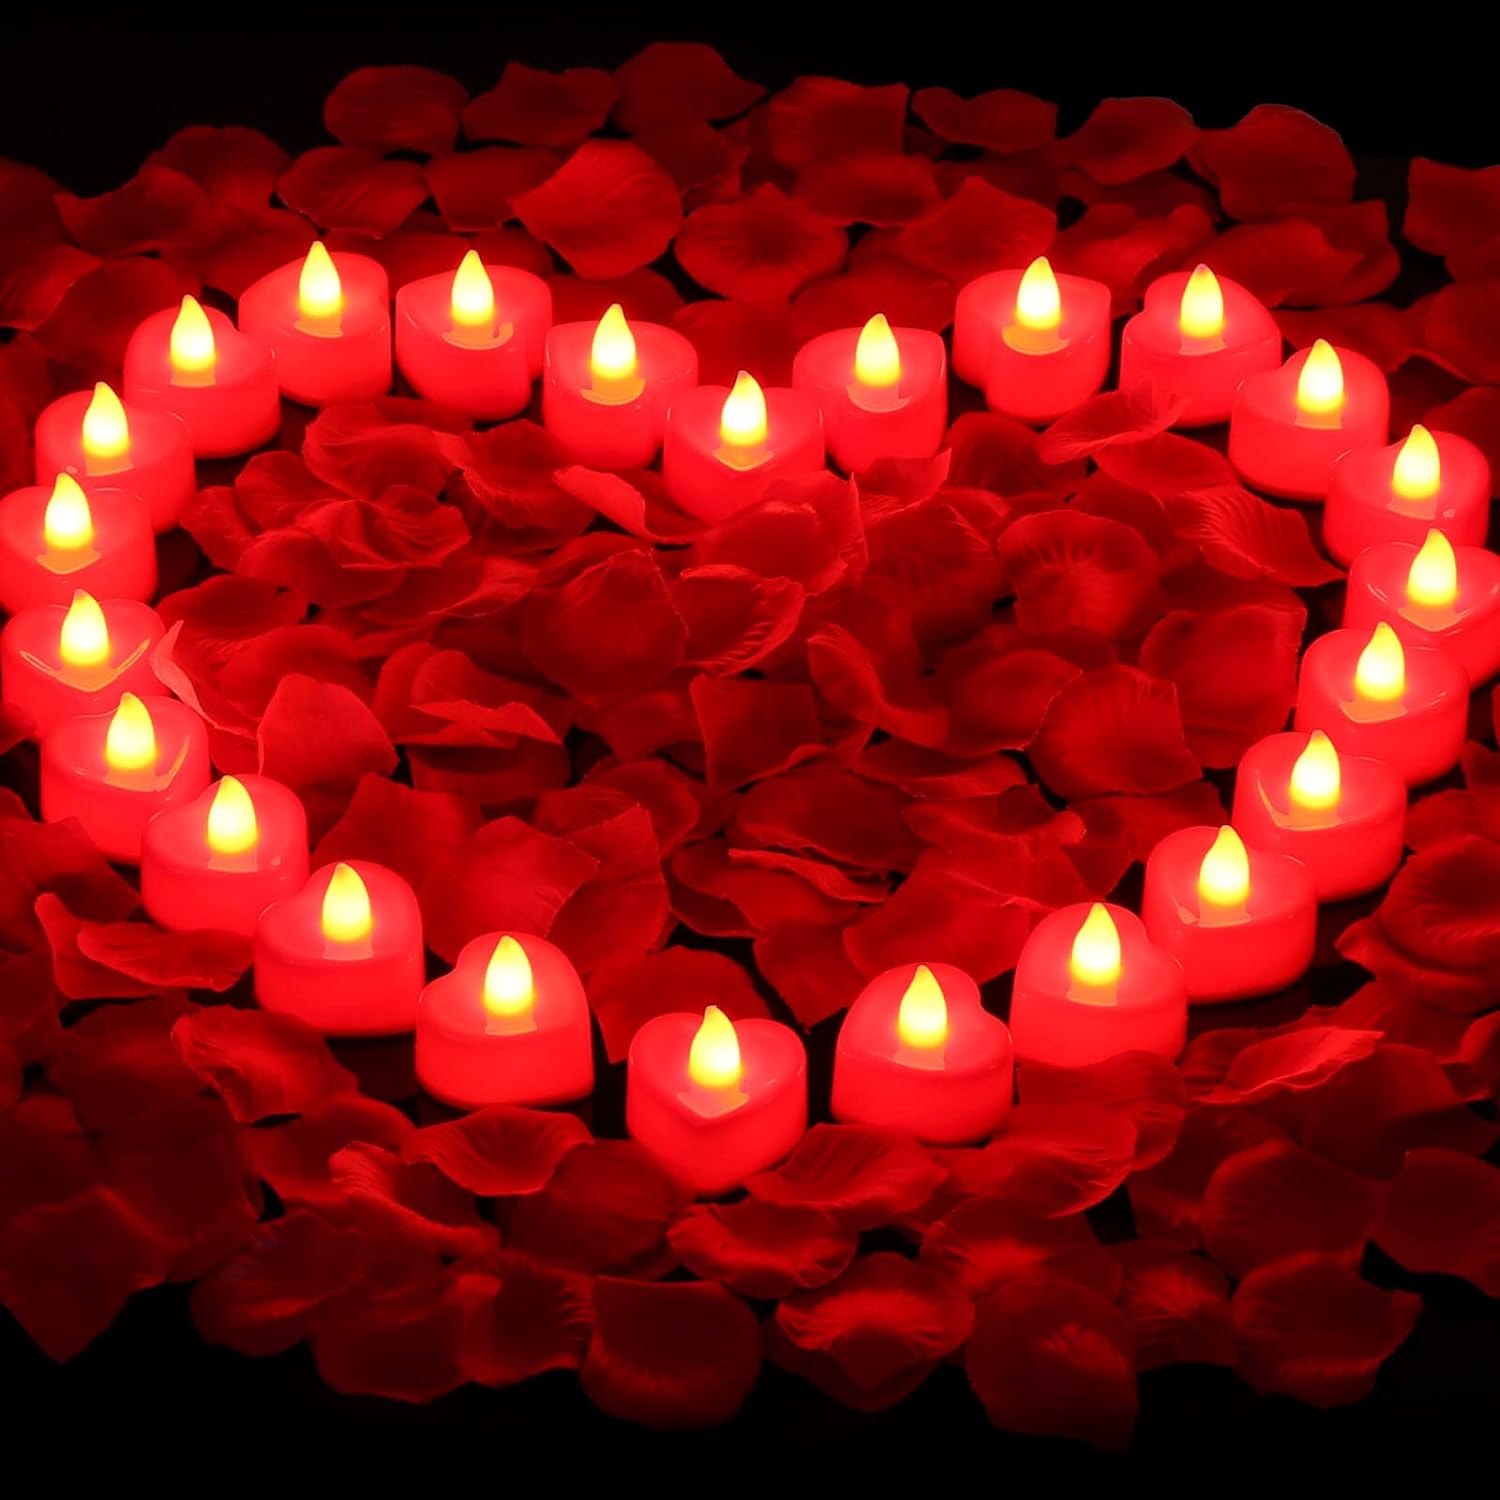 cridoz Red Rose Petals for Romantic Night for him Set, 2000 Pieces Artificial Rose Petals with 24 Pieces Red Flameless LED Candles for Decoration Wedding Party Valentine' Day(Red)